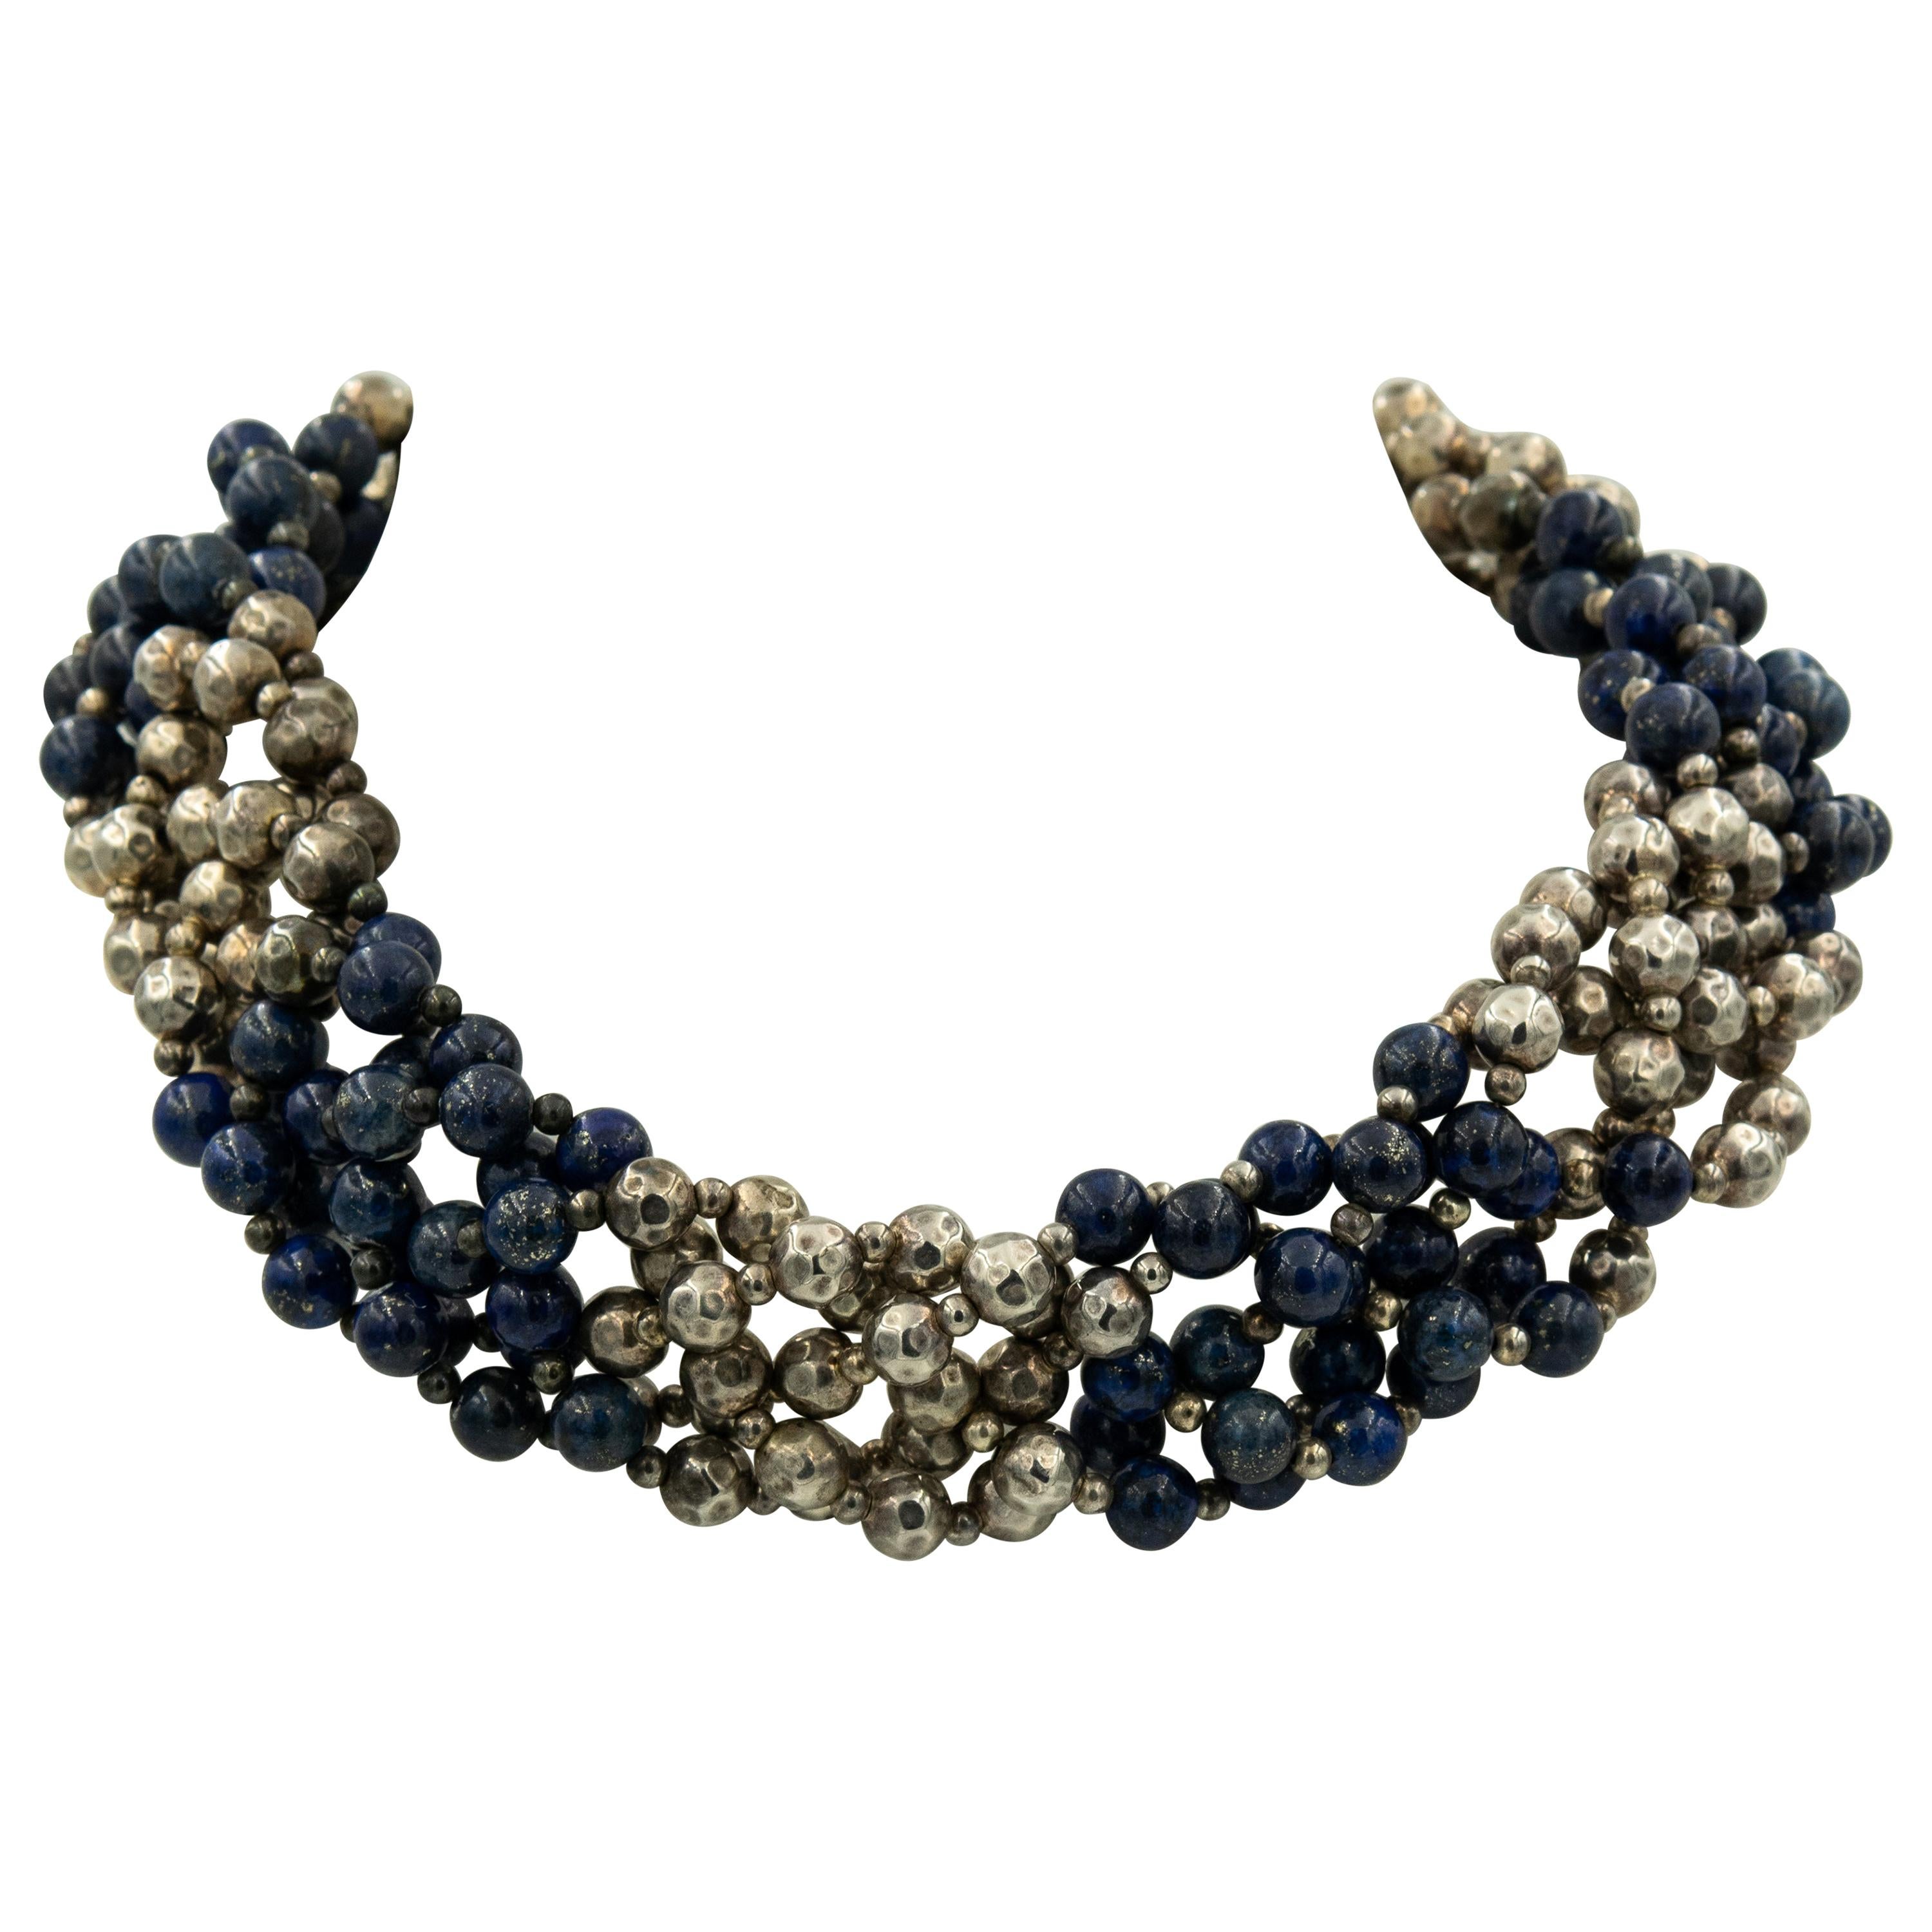 Woven Lapis Lazuli and Hammered Sterling Silver Bead Choker Necklace